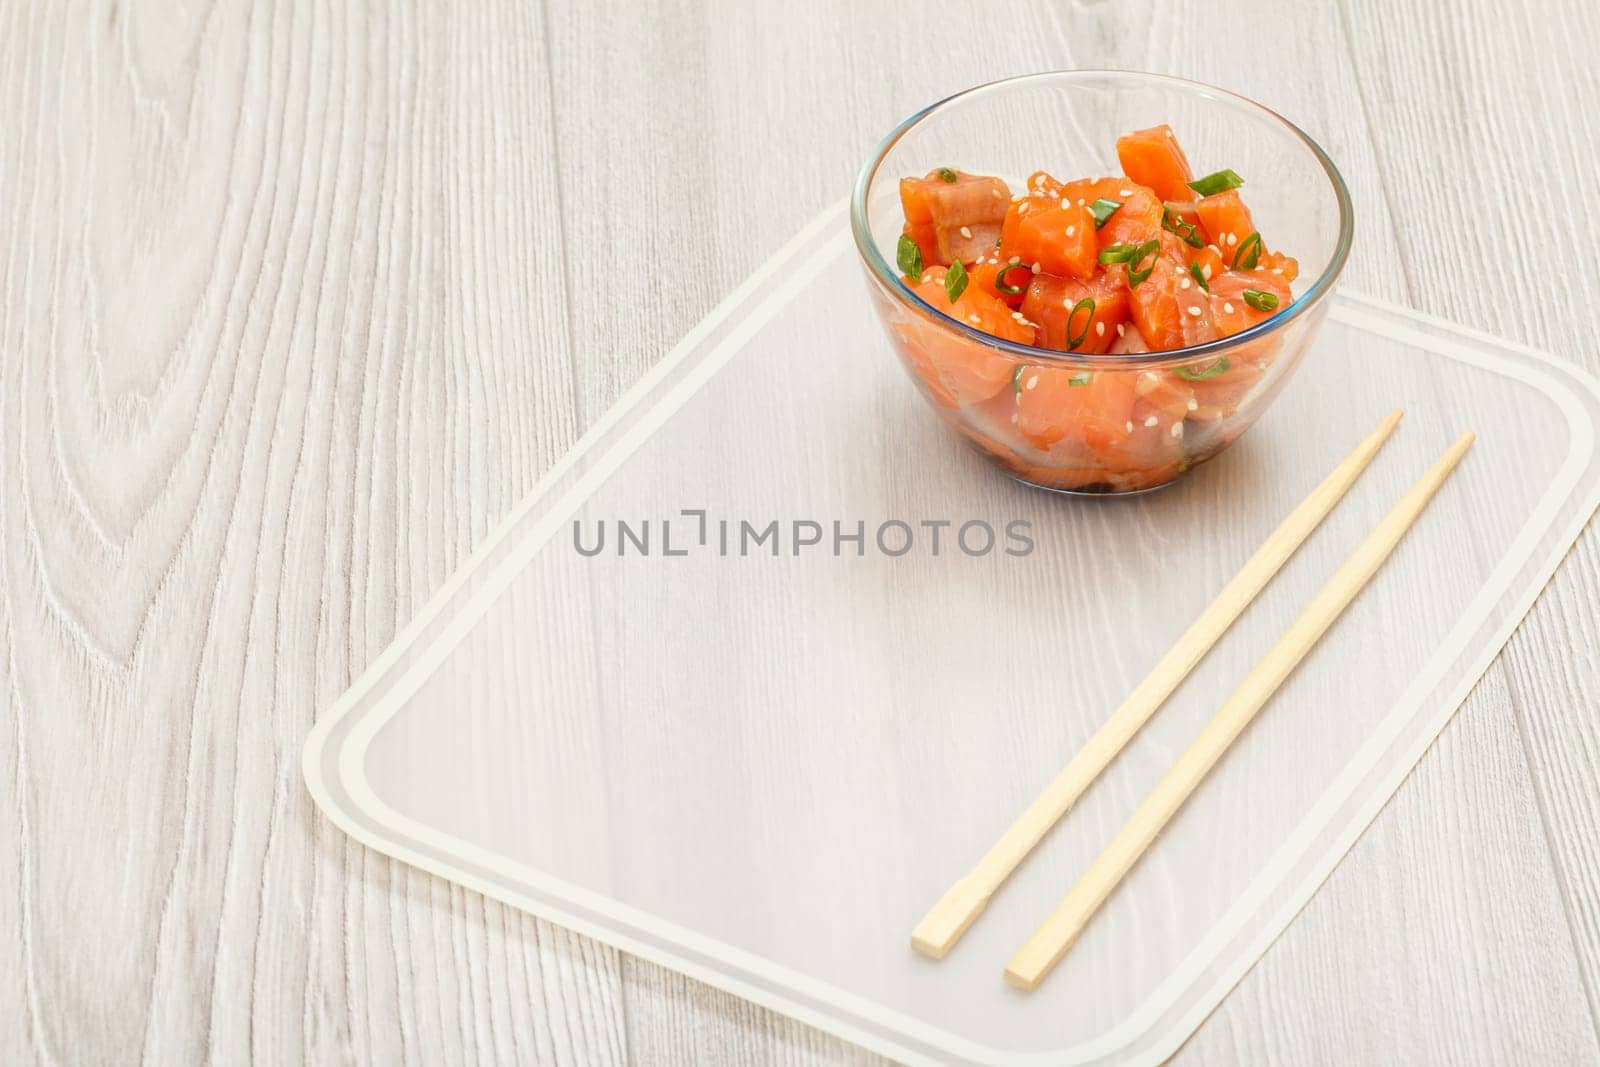 Hawaiian salmon poke with green onions and sesame seeds in glass bowl with chopsticks on kitchen napkin. Top view with copy space. Organic seafood.